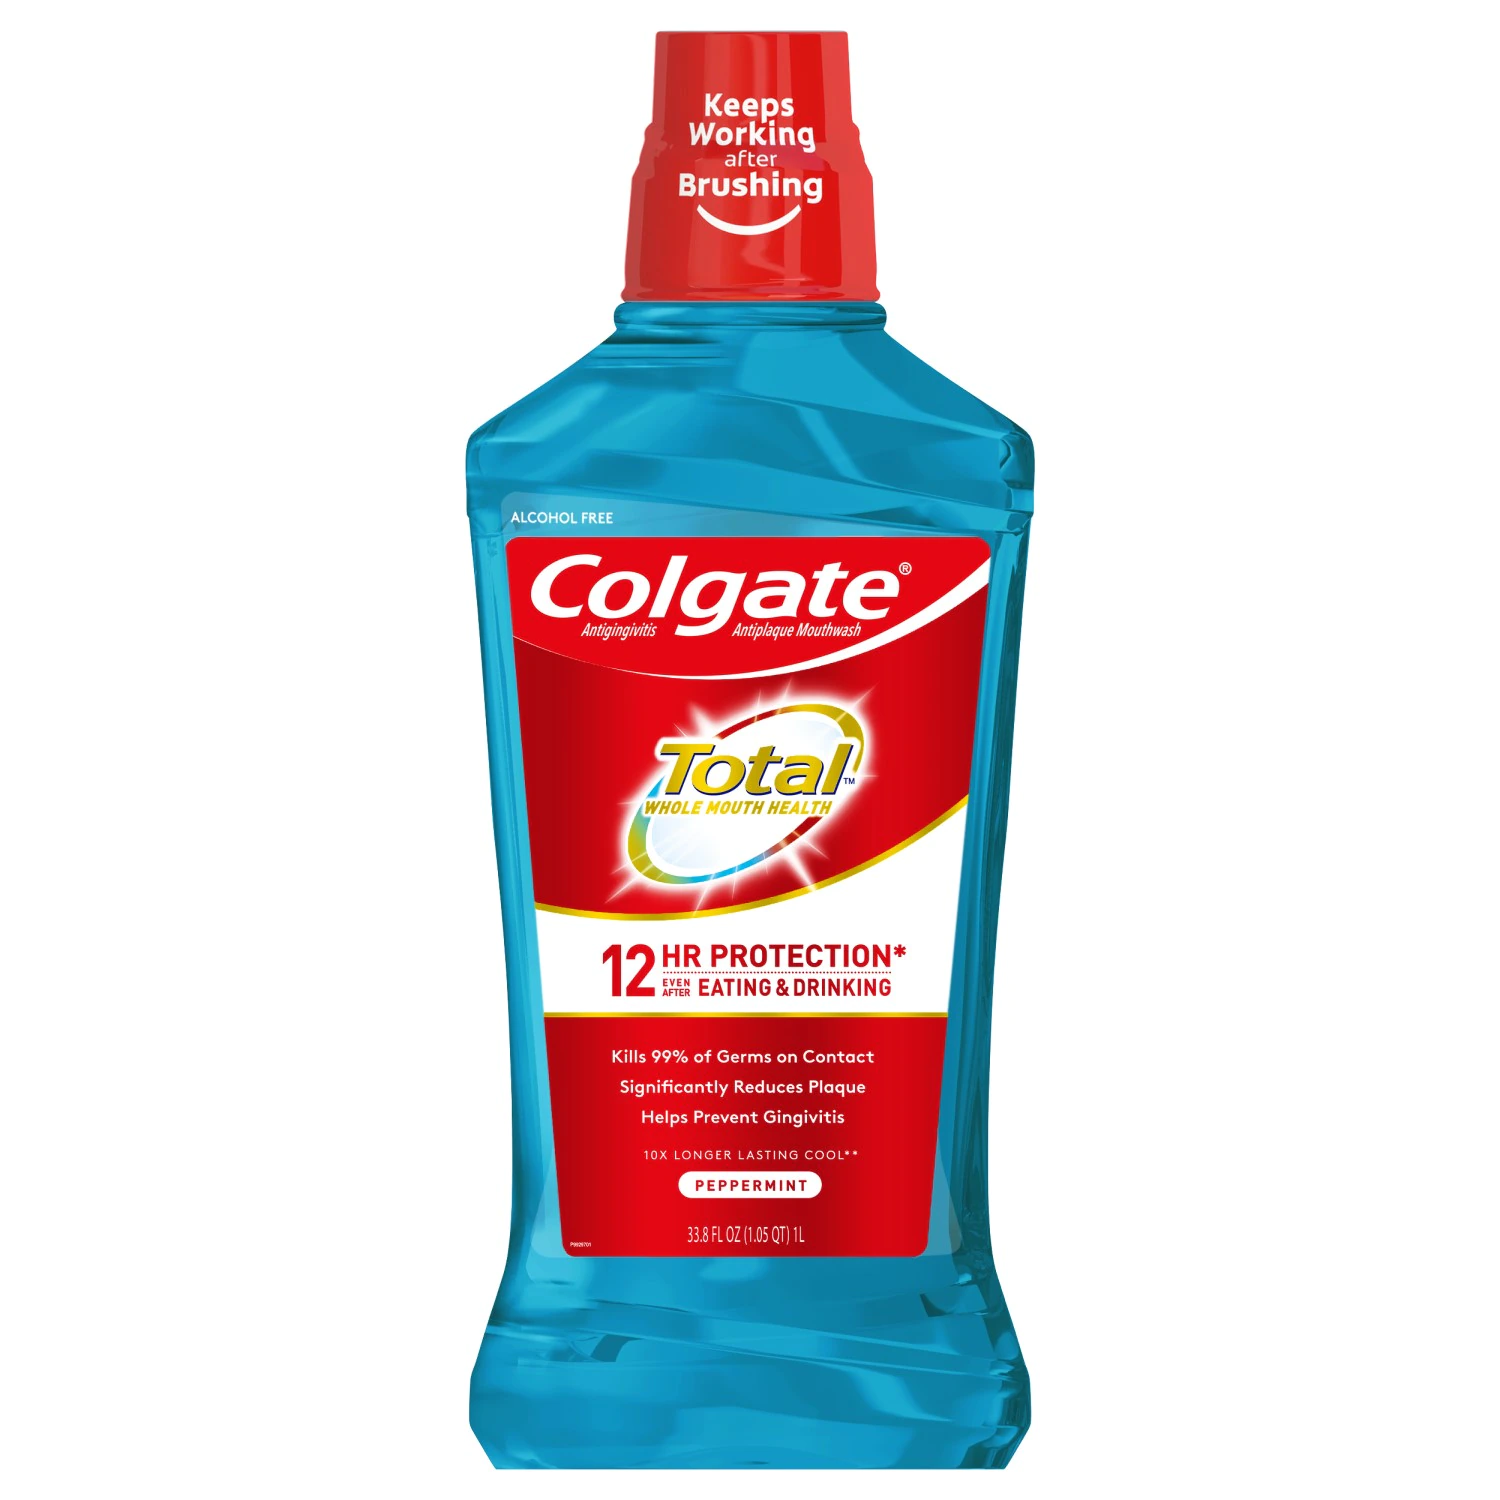 Save $1.00 with any ONE (1) purchase of COLGATE MOUTHWASH or MOUTH RINSE Coupon